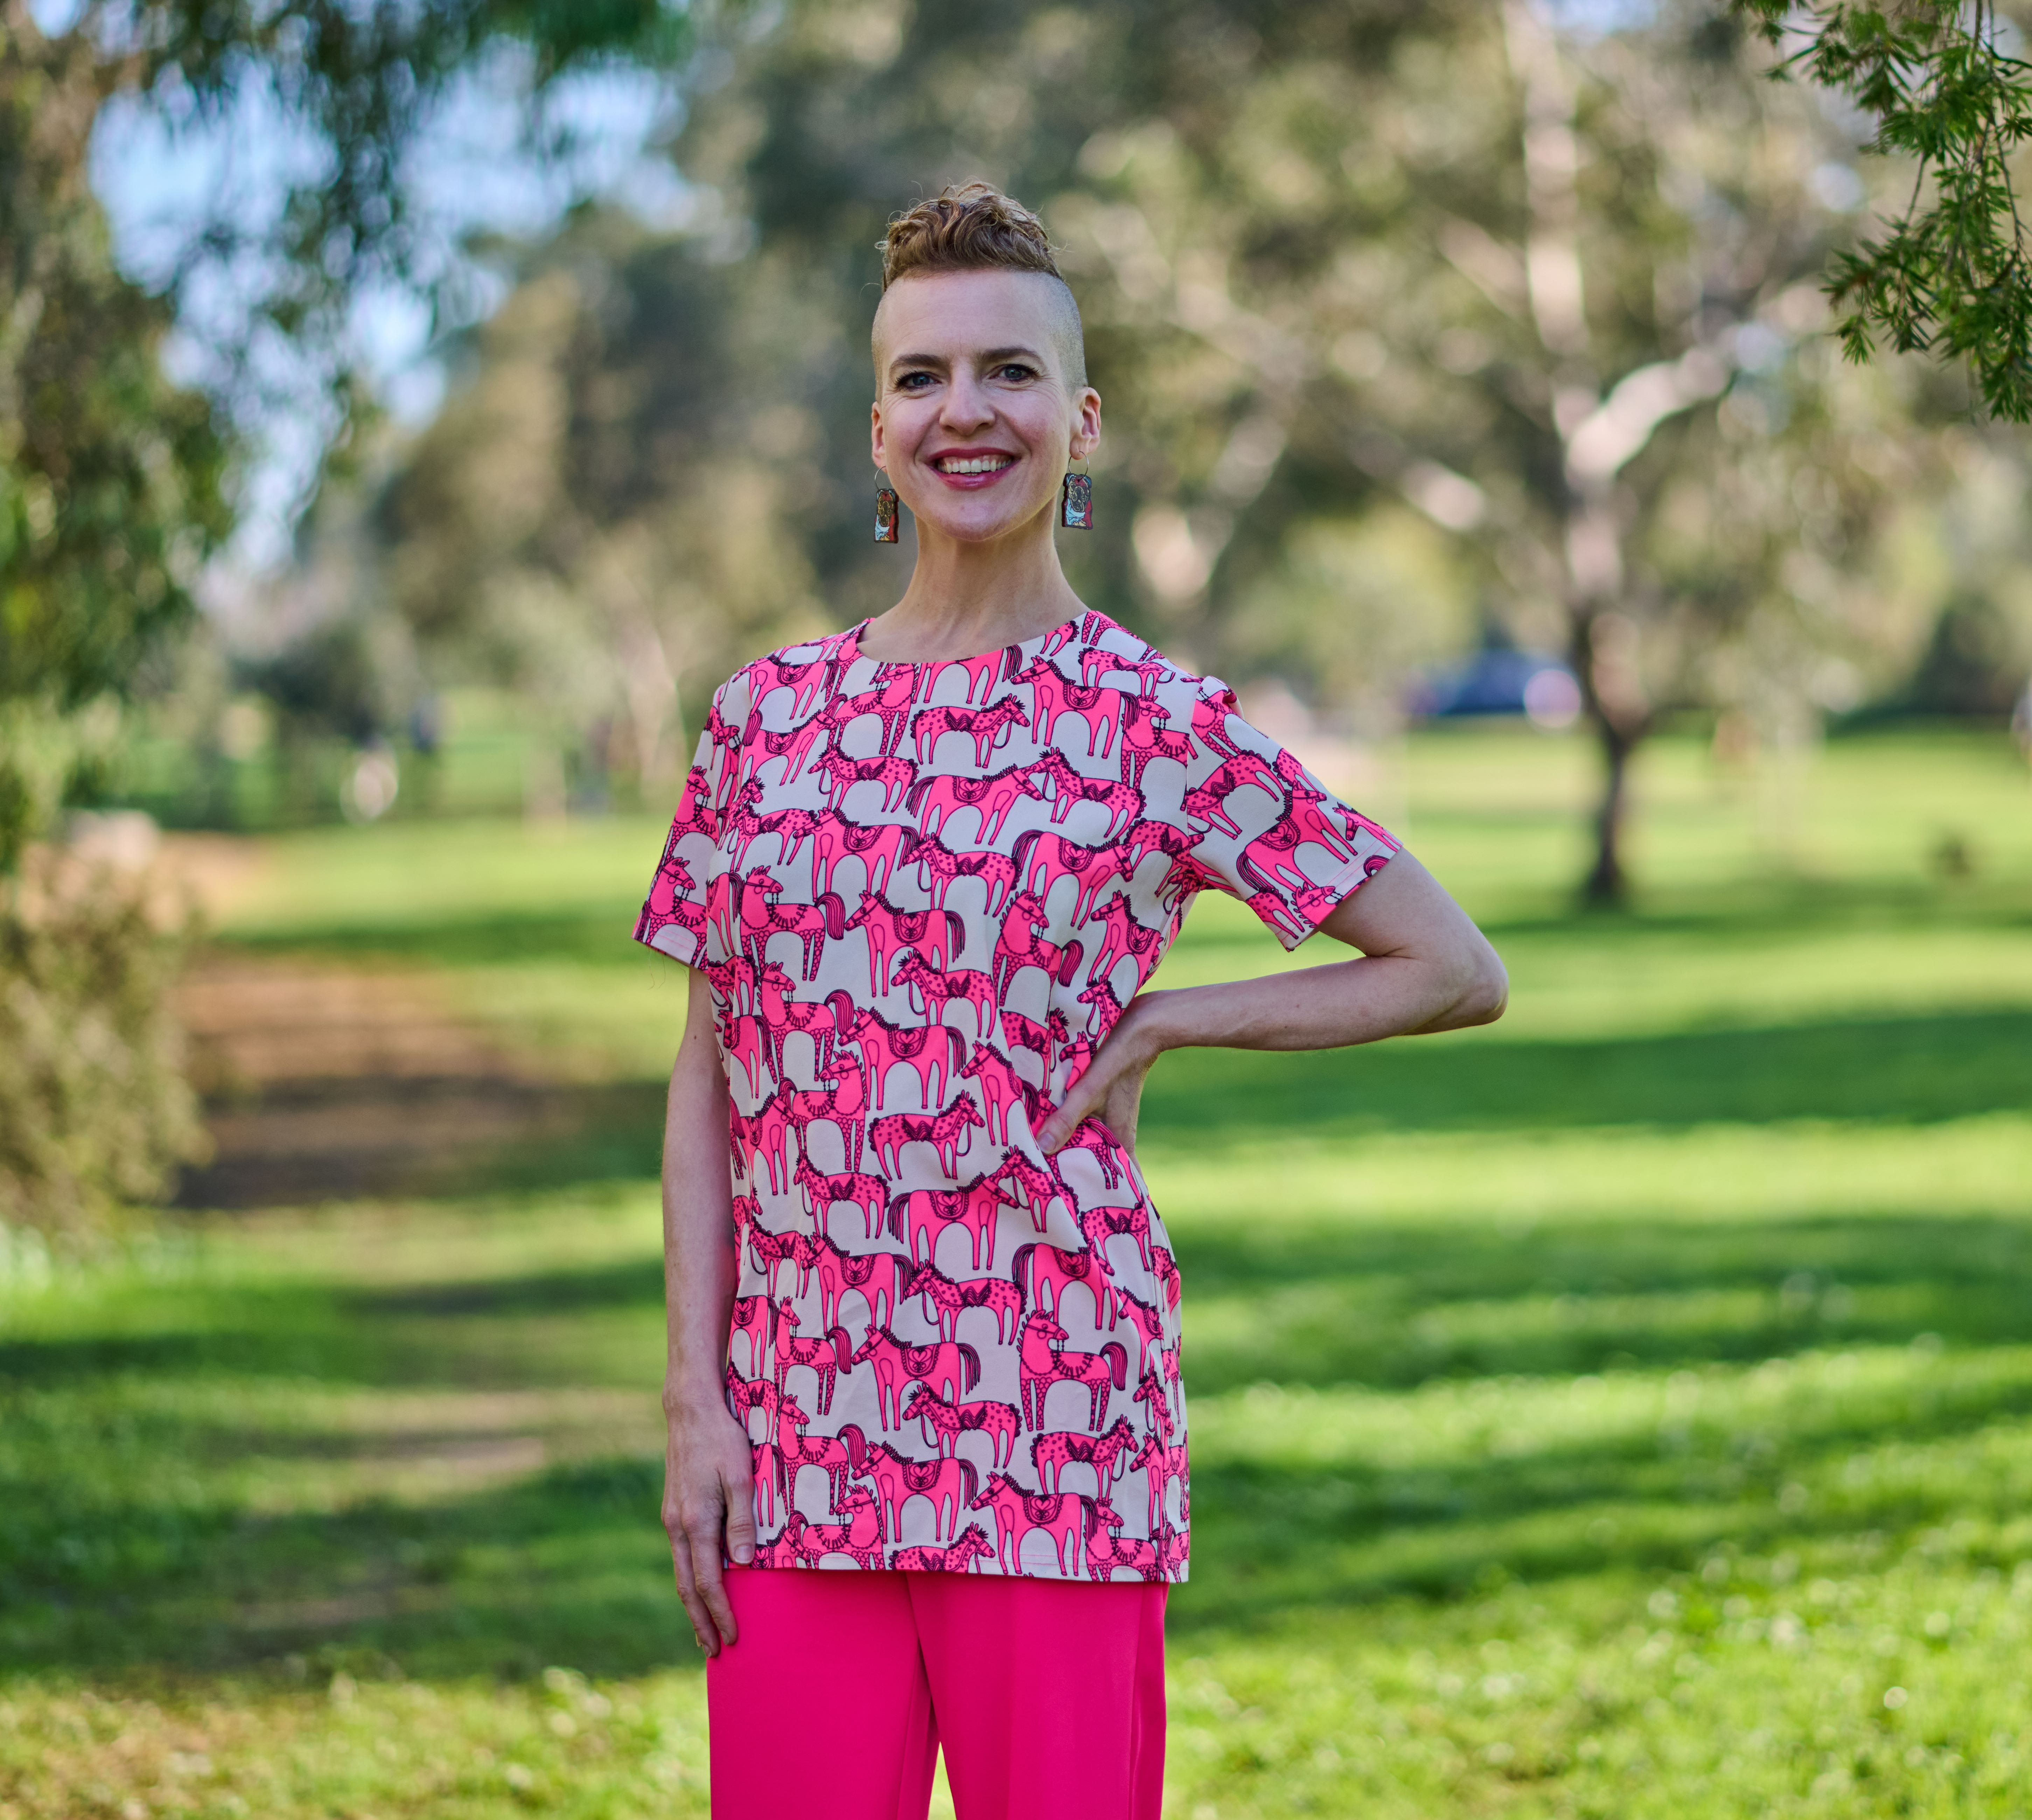 A person with short hair, wearing a pink top and pink pants standing with one hand on their hip in a green park smiling.